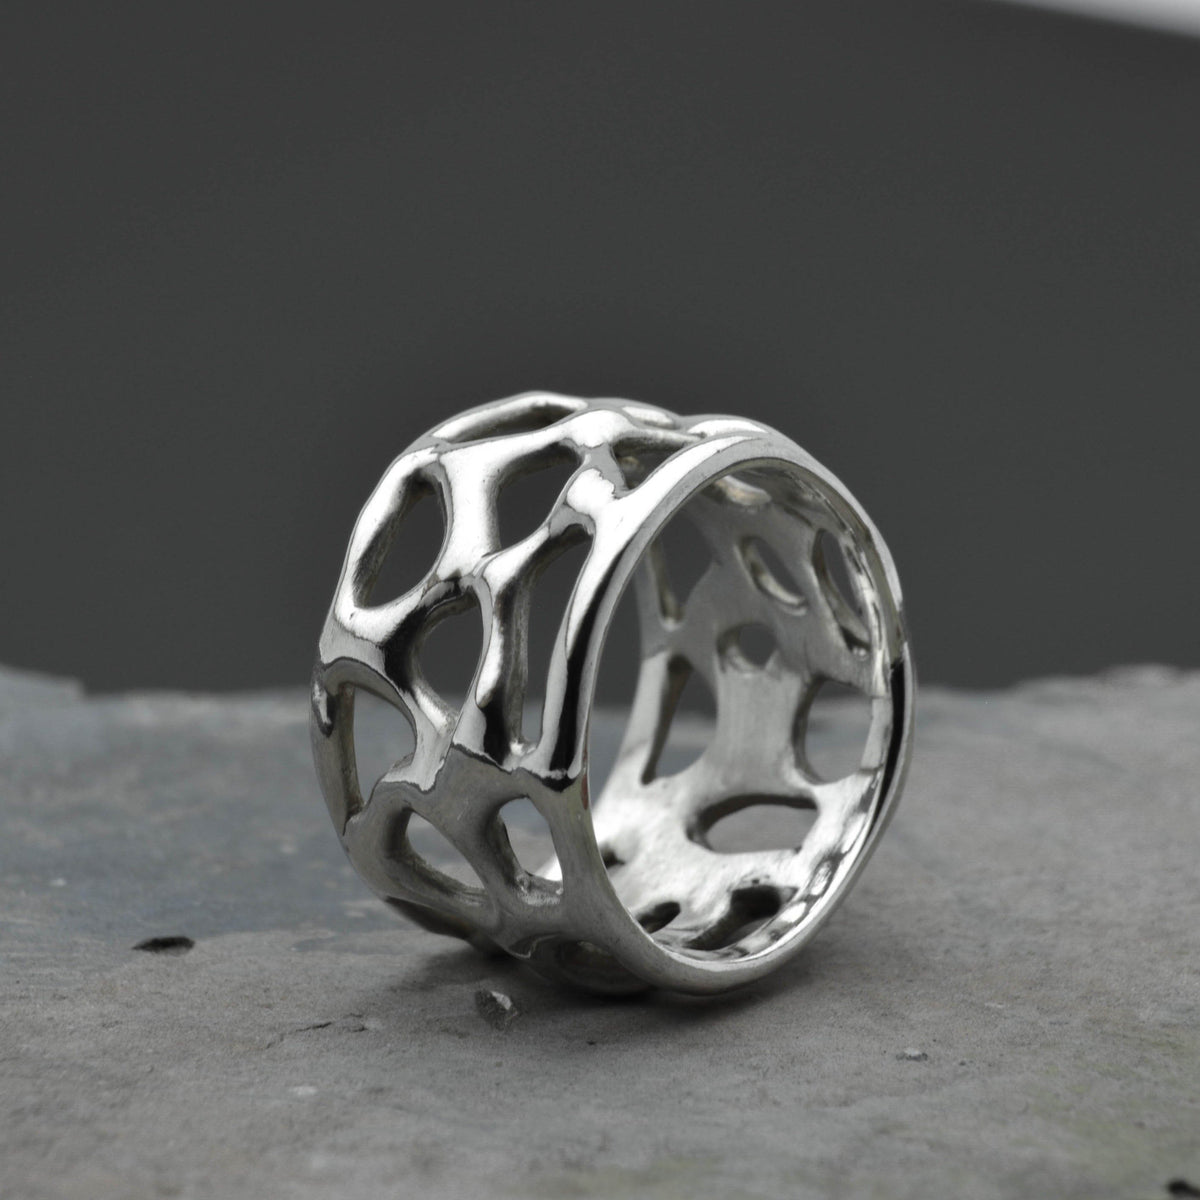 Organic Elegance: A One-of-a-Kind Sterling Silver Ring Inspired by Natural Beauty